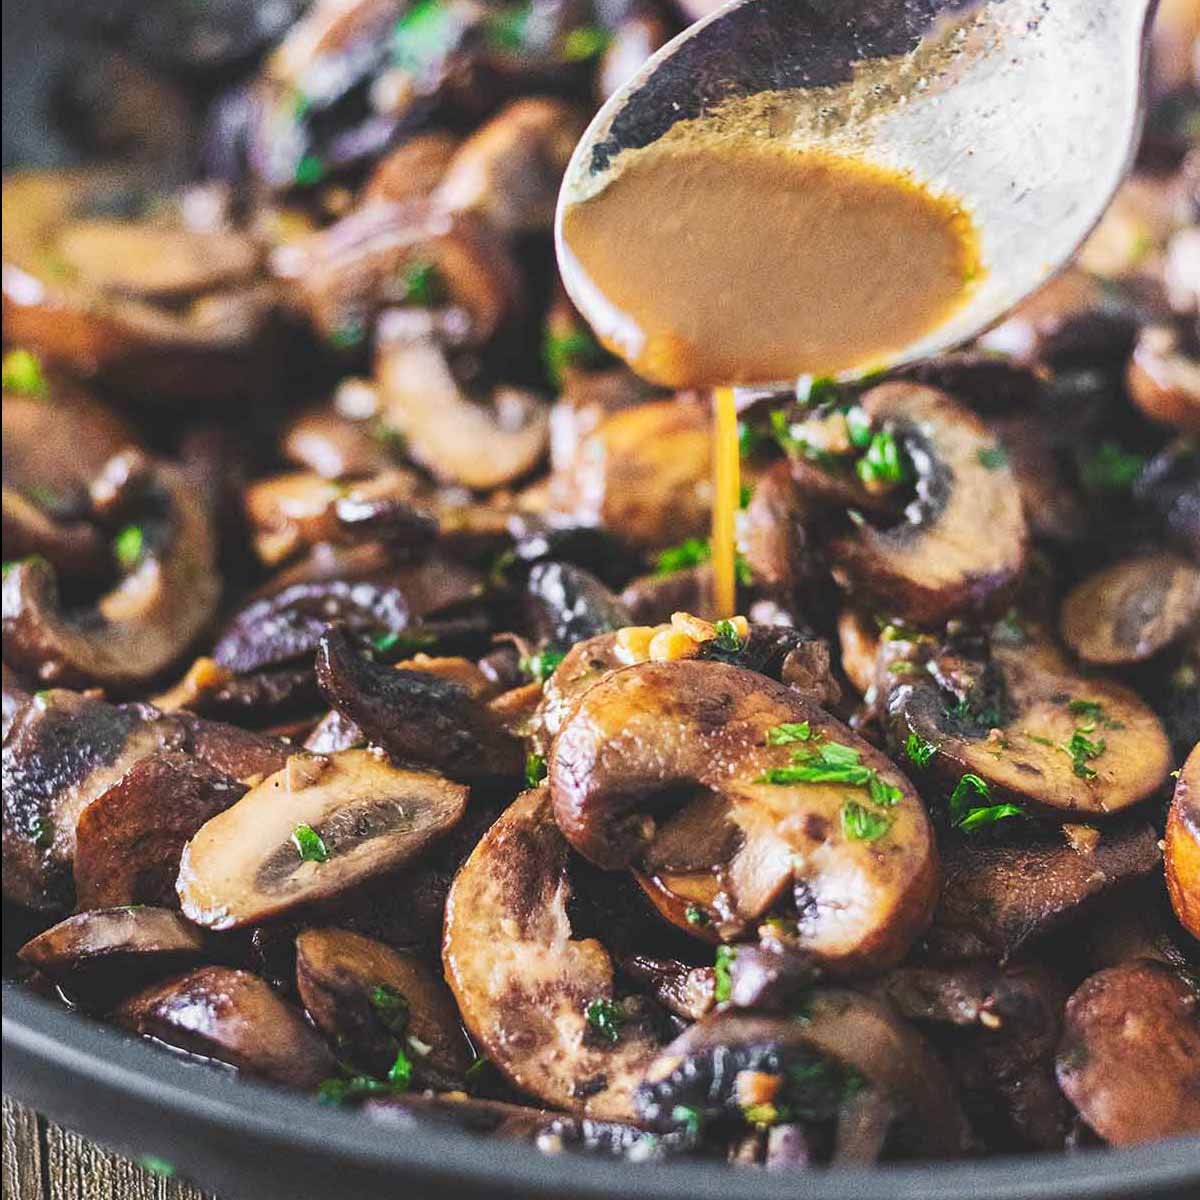 Sauce being spooned over garlic butter mushrooms on a dark plate.